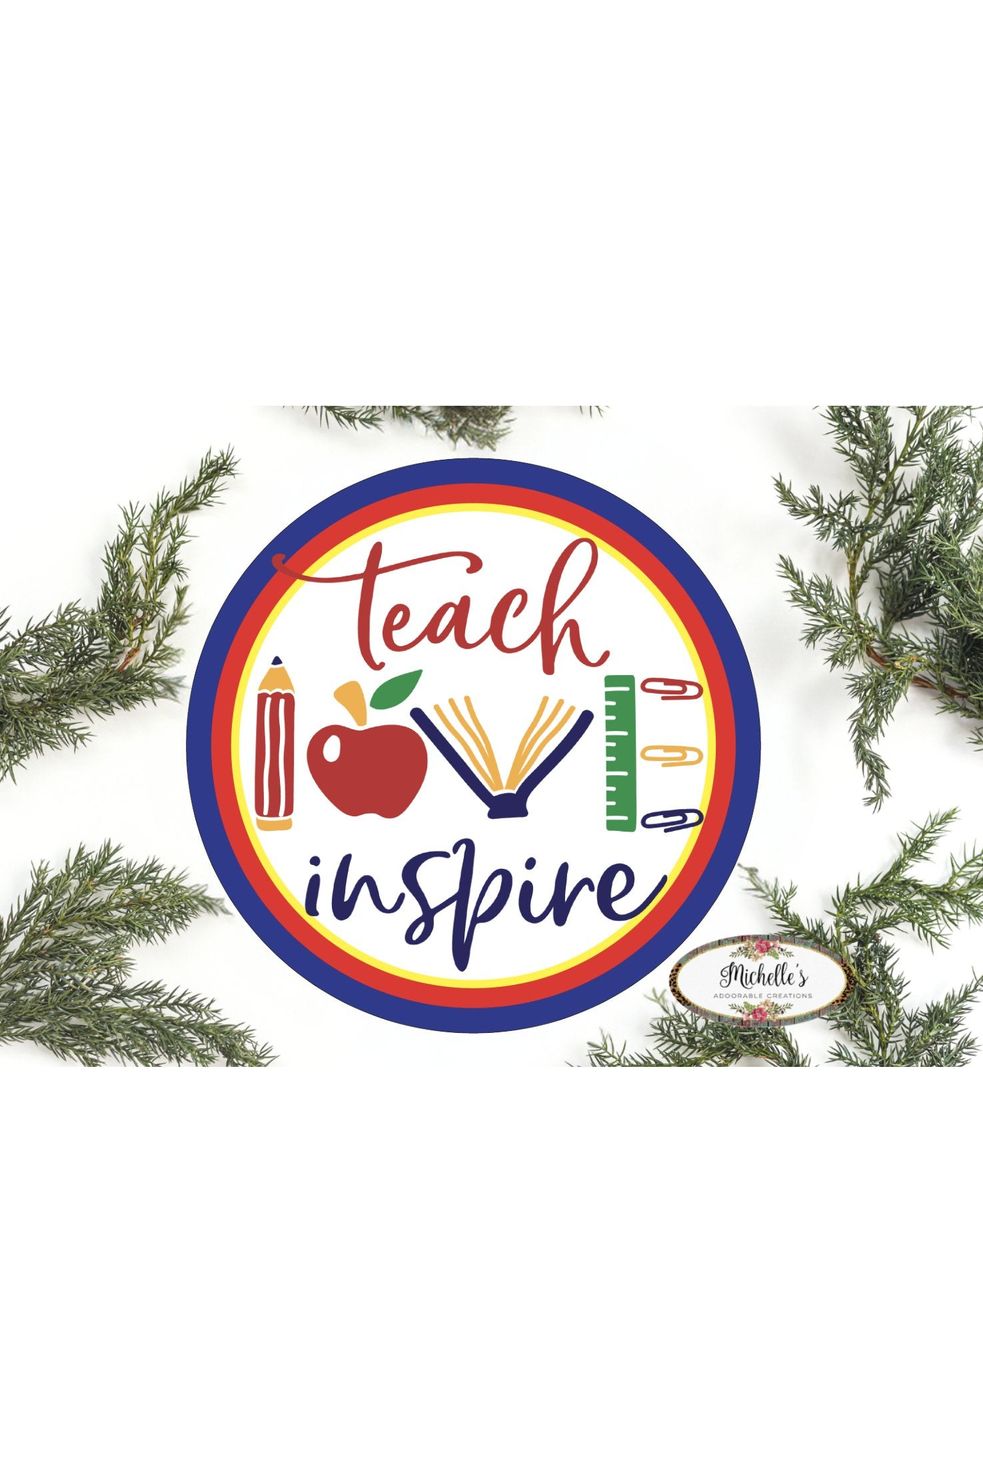 Teach Love Inspire Round Sign - Wreath Enhancement - Michelle's aDOORable Creations - Signature Signs